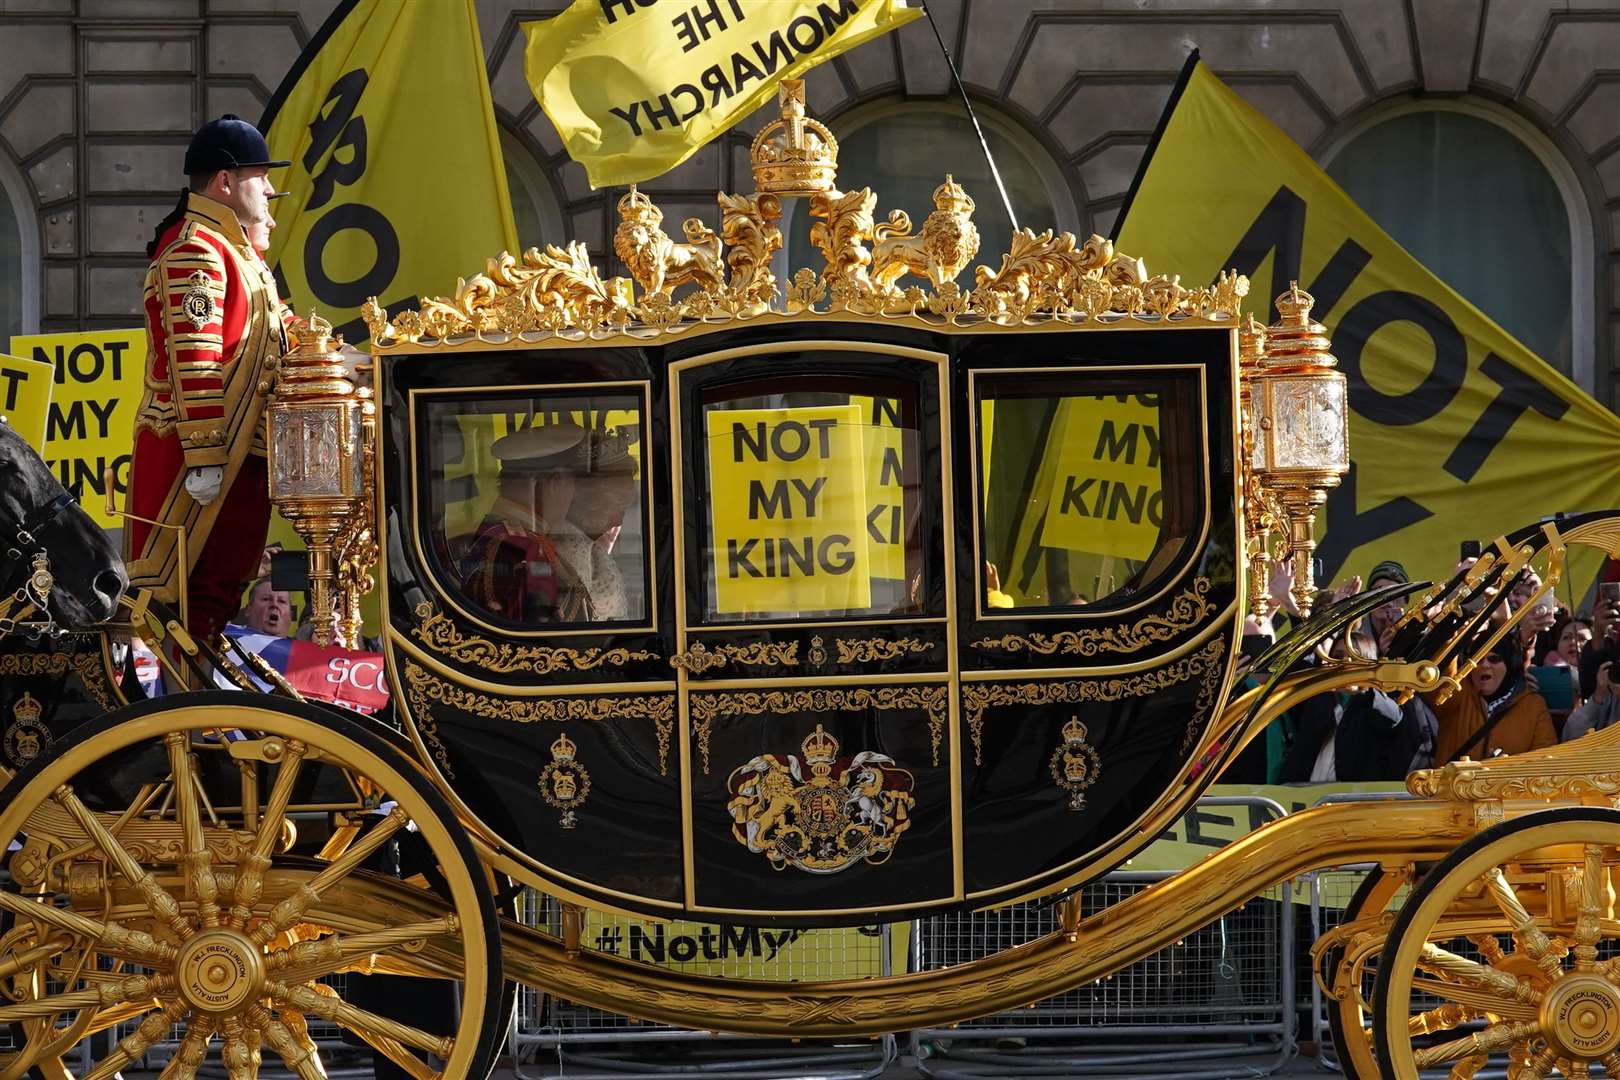 Anti-monarchy pressure group Republic protest outside the Palace of Westminster (Gareth Fuller/PA)